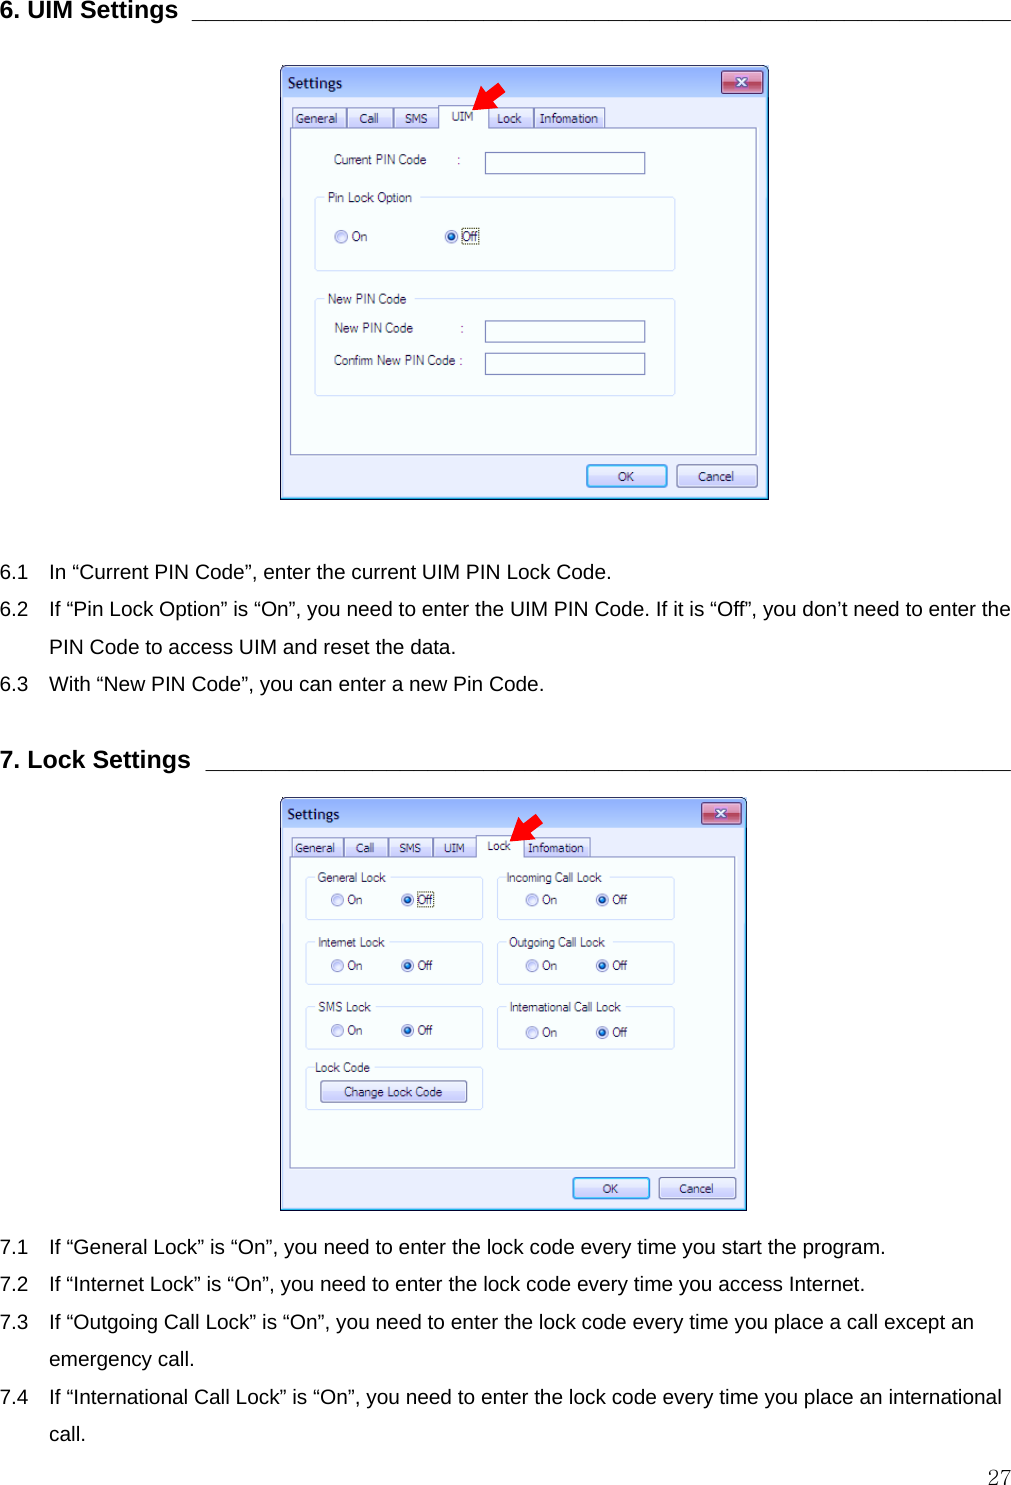  27 6. UIM Settings  ___________________________________________________________               6.1    In “Current PIN Code”, enter the current UIM PIN Lock Code. 6.2    If “Pin Lock Option” is “On”, you need to enter the UIM PIN Code. If it is “Off”, you don’t need to enter the PIN Code to access UIM and reset the data. 6.3    With “New PIN Code”, you can enter a new Pin Code.  7. Lock Settings  __________________________________________________________             7.1    If “General Lock” is “On”, you need to enter the lock code every time you start the program. 7.2   If “Internet Lock” is “On”, you need to enter the lock code every time you access Internet. 7.3    If “Outgoing Call Lock” is “On”, you need to enter the lock code every time you place a call except an emergency call. 7.4    If “International Call Lock” is “On”, you need to enter the lock code every time you place an international call. 